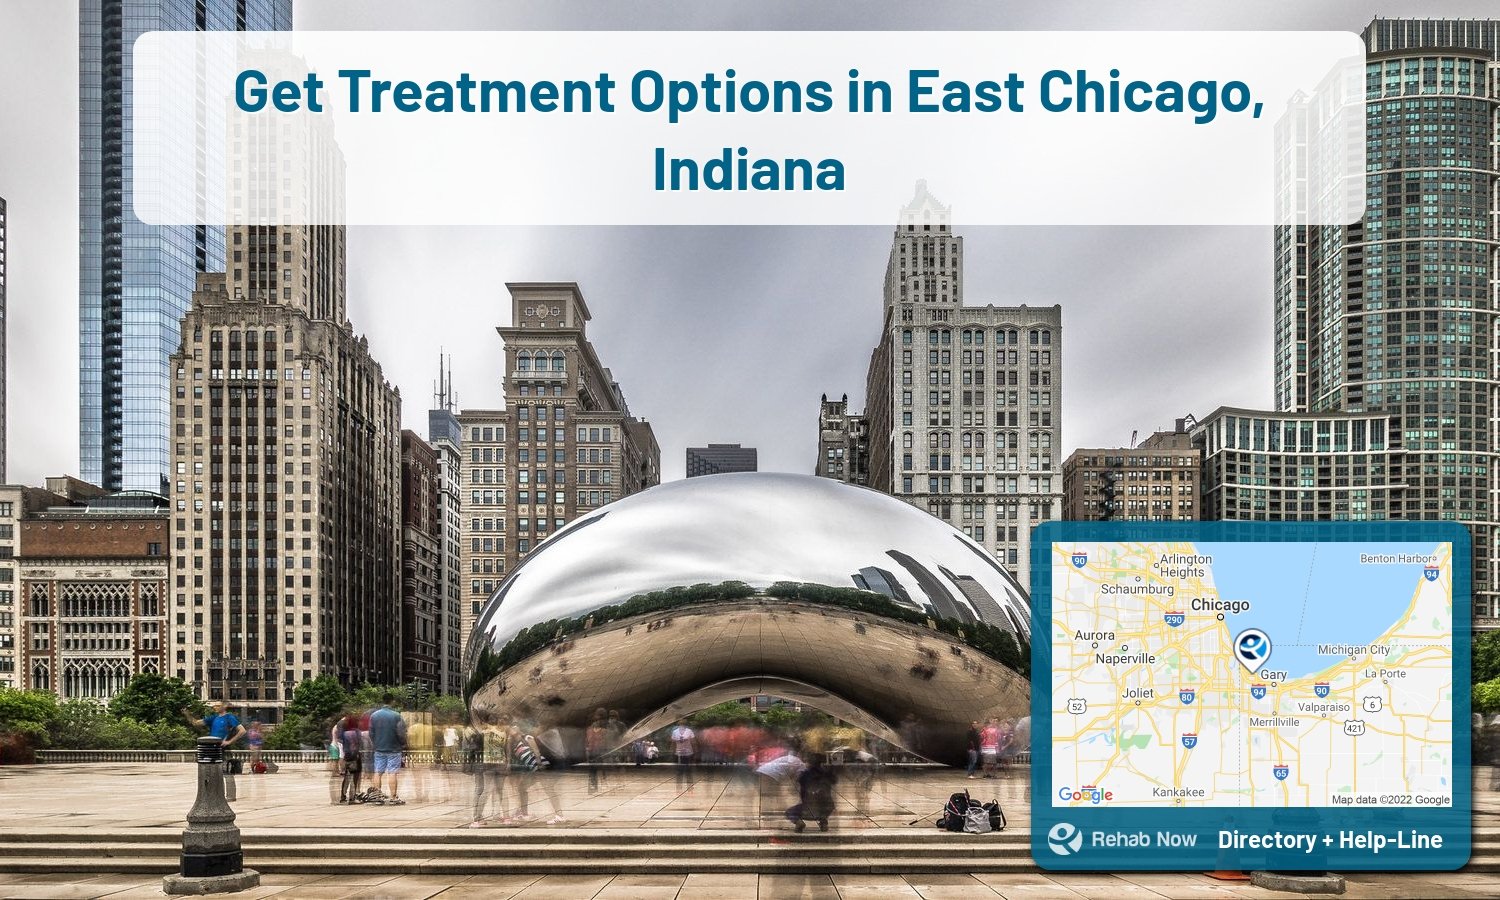 Our experts can help you find treatment now in East Chicago, Indiana. We list drug rehab and alcohol centers in Indiana.